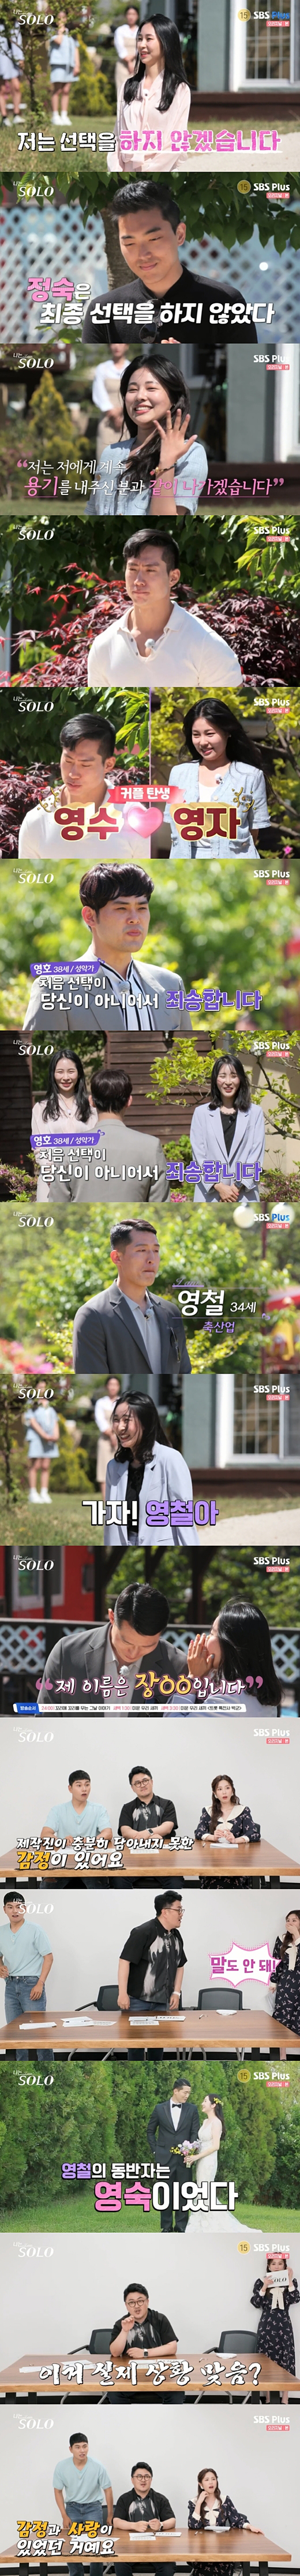 The final result of Im SOLO (I Solo) gave the Great Reversal story: MC Jun Hyoseong was alarmed by scary.On the 25th, cable channel SBS PLUS and NQQ Real dating program Im SOLO were broadcast the final results of the first members.First, Youngsu and Youngja were Choices each other and made up of the first couple, and Jongsu Choices, but Jungsuk did not Choices anyone and the couple disappeared.And after Jung Soon received Choices of Youngho and Youngcheol, Youngcheol was Choices and was concluded as a second couple.Most of the remaining performers do not Choices, and the final Choices of the first members are finished.In the studio, the two couples applauded the birth and raised expectations for the wedding photo to be released at last.In the meantime, the production team gave a hint in the middle that there was a couple that led to the actual marriage among the first members, and the last hint was that the man who marriage was Youngcheol.For this reason, the curiosity about who will be the wife of Young-chul has reached its peak.In the end, Young-cheol and Jung-soon were the final couple, and Jung-soon seemed to be a candidate for Young-chuls wife naturally. In fact, there was a reverse story that no one could imagine.The crew said, This is how it ended in Solo Europe, but when it comes back to reality, there are feelings that continue.There is an emotion that the production team did not have enough in Solo Europe. The wedding photo was released. Surprisingly, Young-cheols wife was Young-sook.The MCs were stunned by the shocking Reversal story, and Jun Hyoseong was unable to shut up, saying, Im really creepy! ridiculous.The production team said that Young-cheol and Young-sook came to marriage after shooting, saying, There was emotion and love that the production team could not contain.